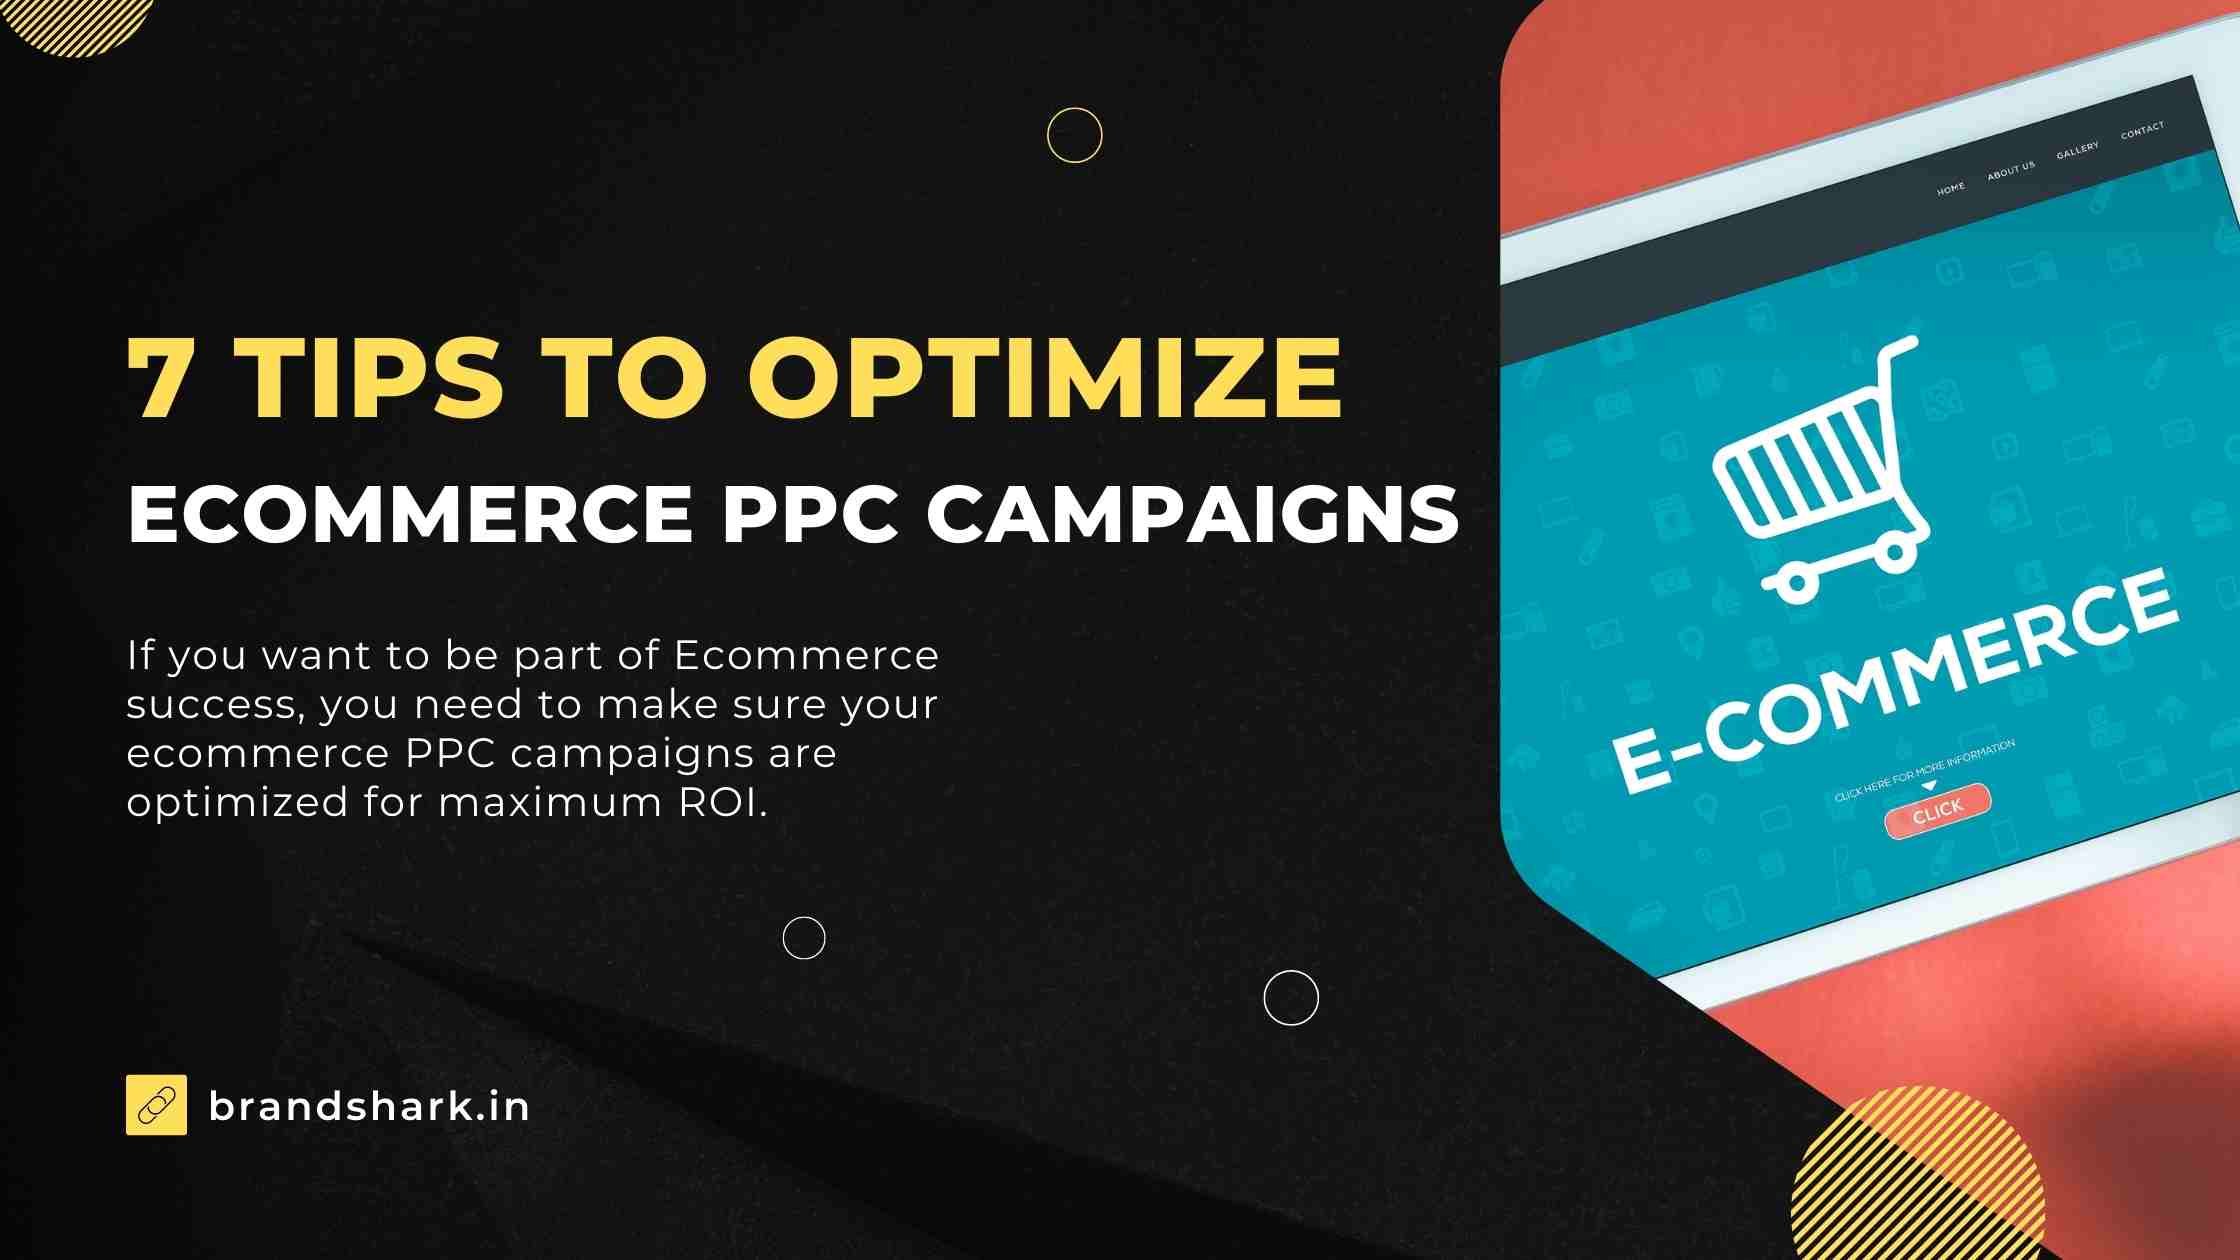 A web page titled '7 Tips to Optimize Ecommerce PPC Campaigns' with a subheading that reads 'If you want to be part of Ecommerce success, you need to make sure your Ecommerce PPC campaigns are optimized for maximum ROI', and a 'CLICK HERE FOR MORE INFORMATION' button.